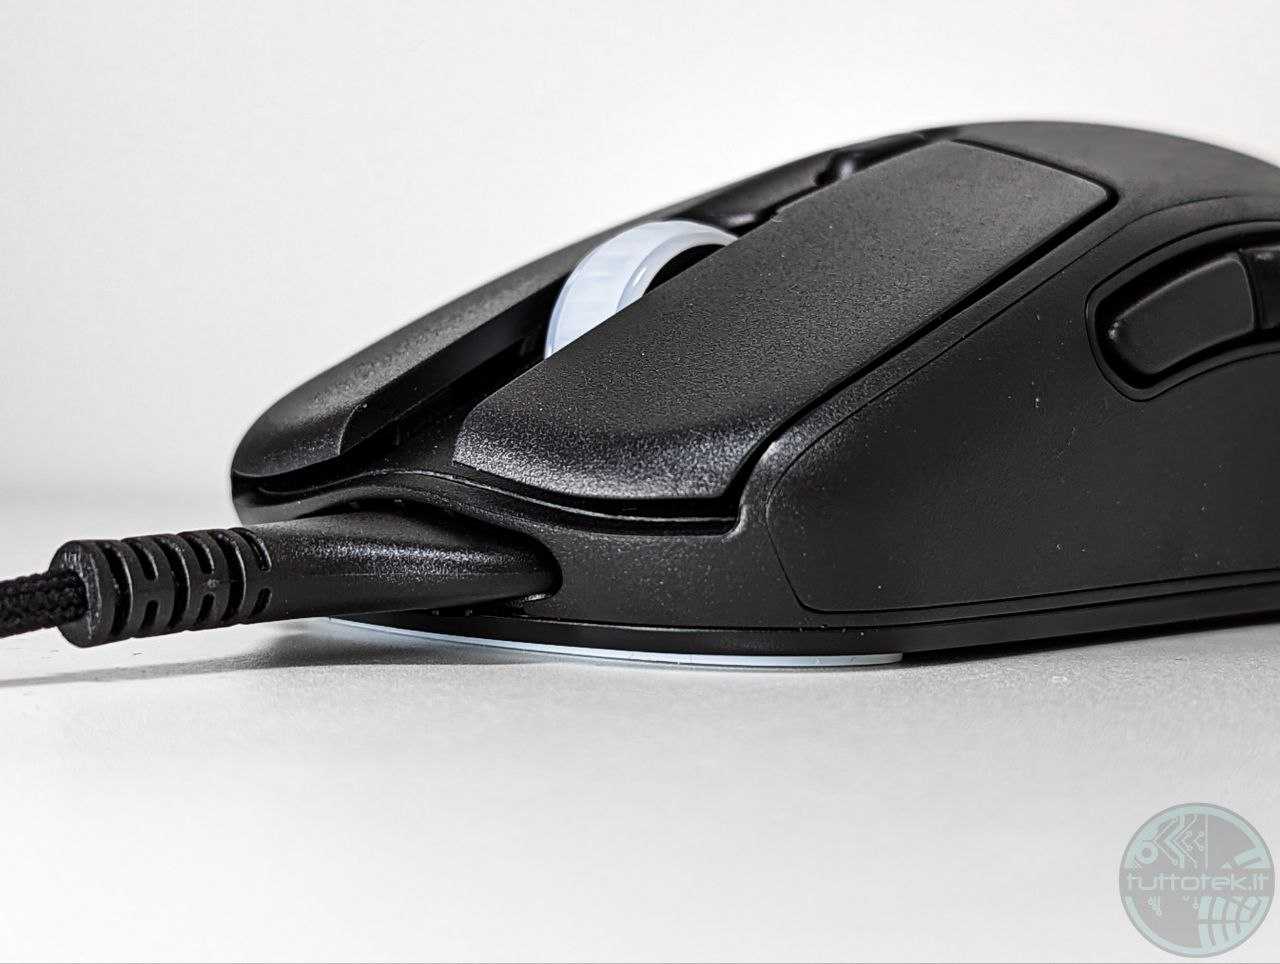 Fnatic BOLT review: a bolt from the blue